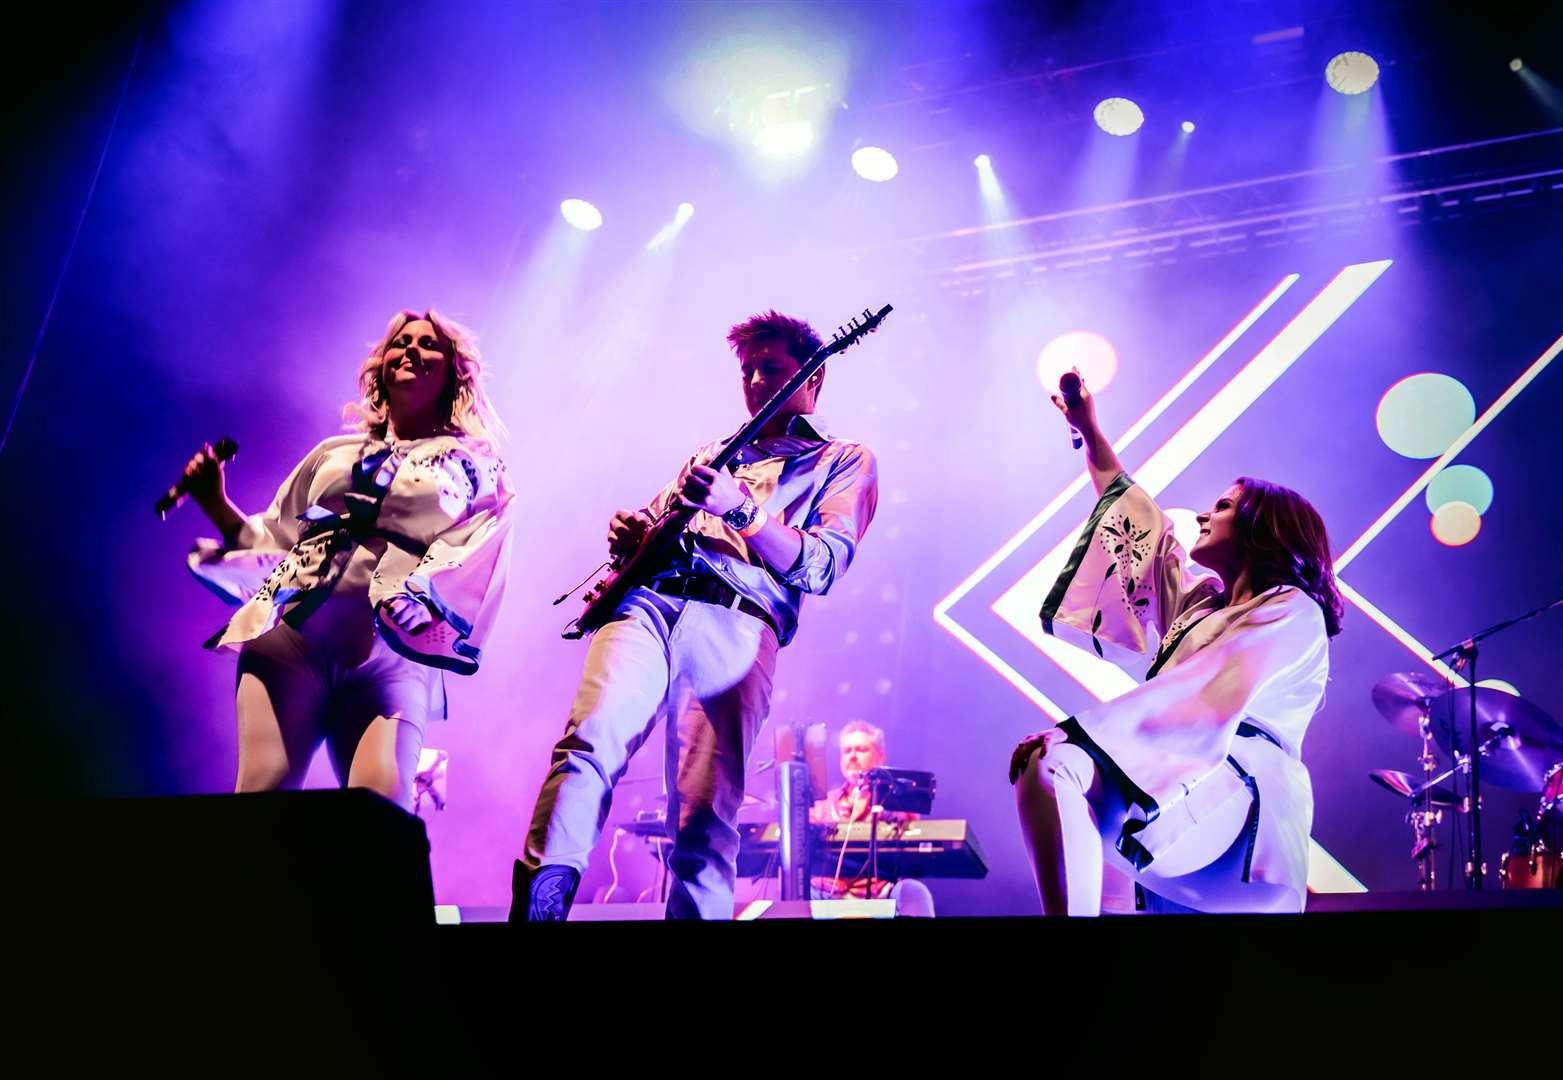 Waterloo A Tribute To ABBA – The Arena Show will be coming to Aberdeen in December.